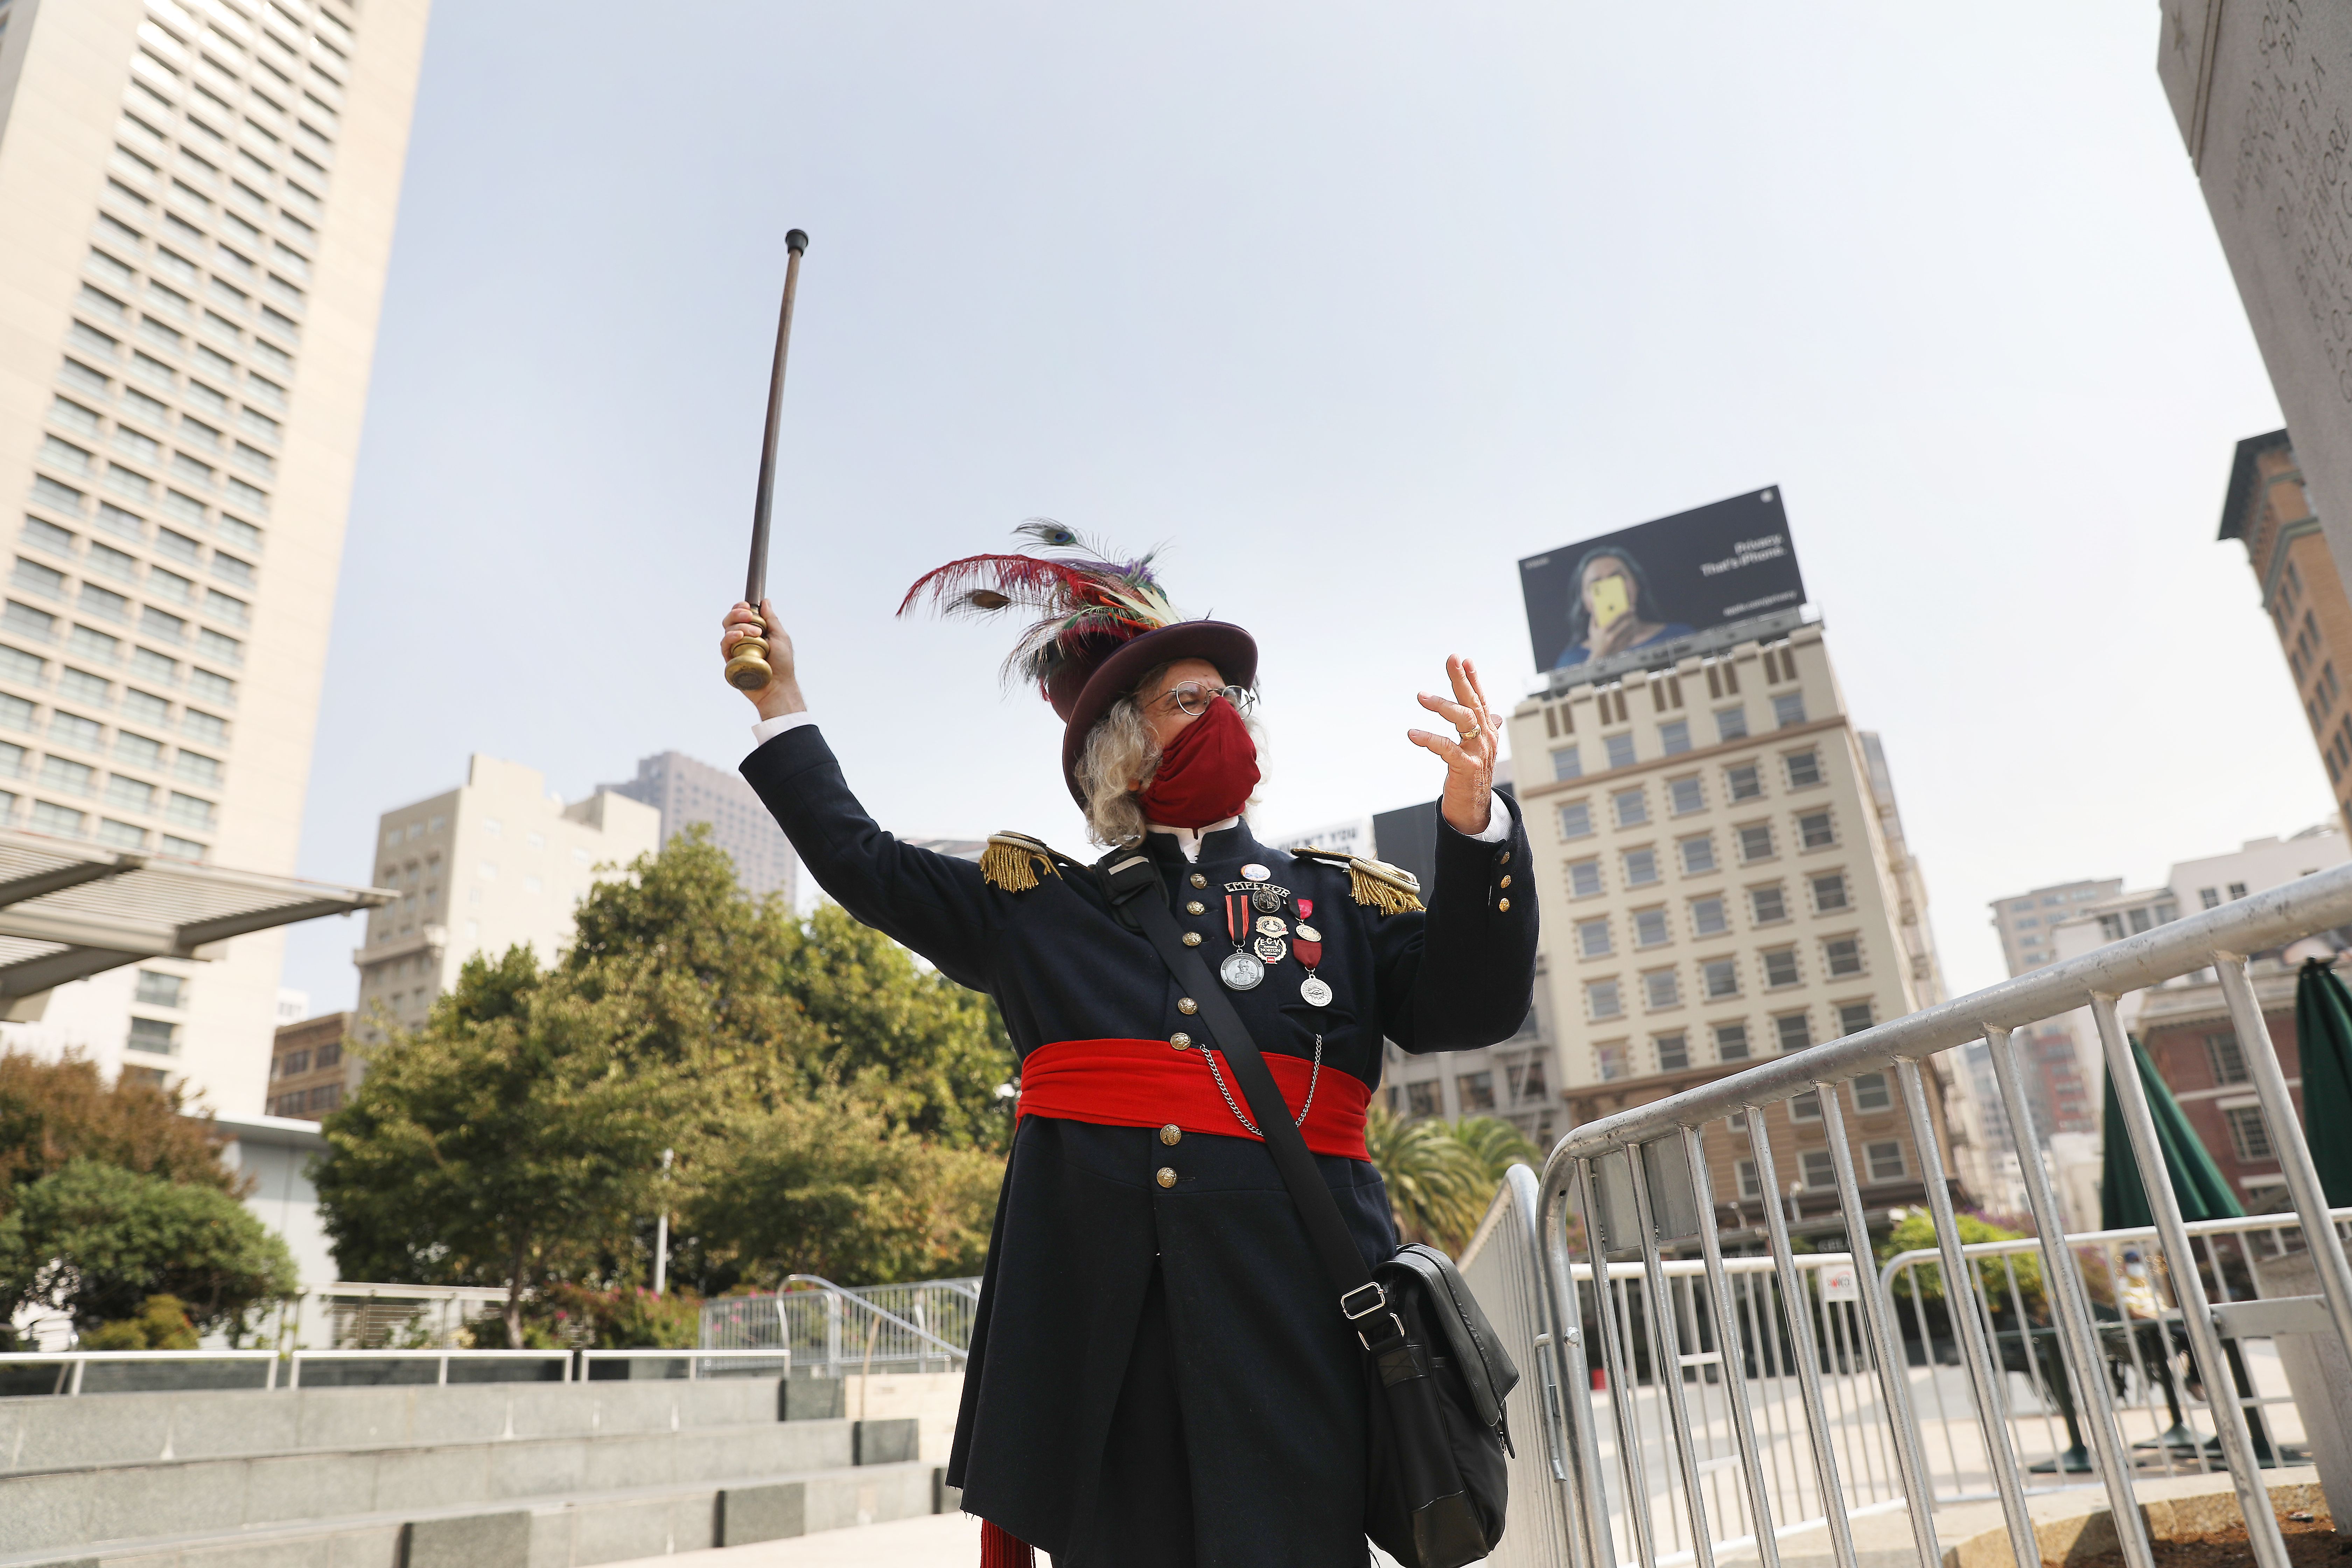 Photo of an Emperor Norton impersonator, dressed in full regalia and waving a walking stick